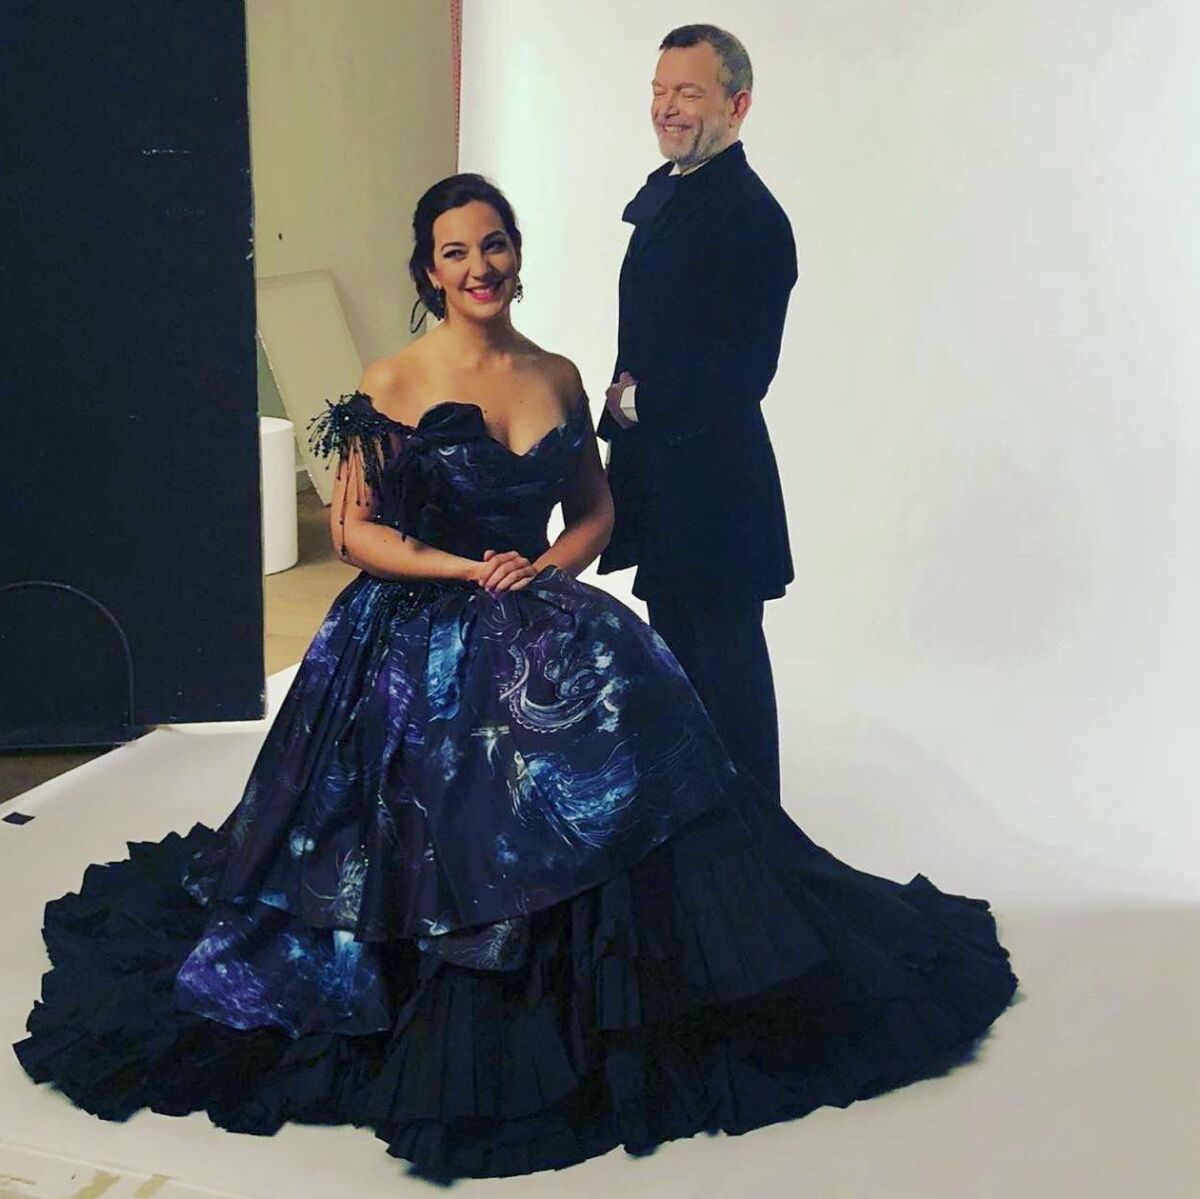 Marina Viotti in a grand ball dress by Julien Fournié for her new album